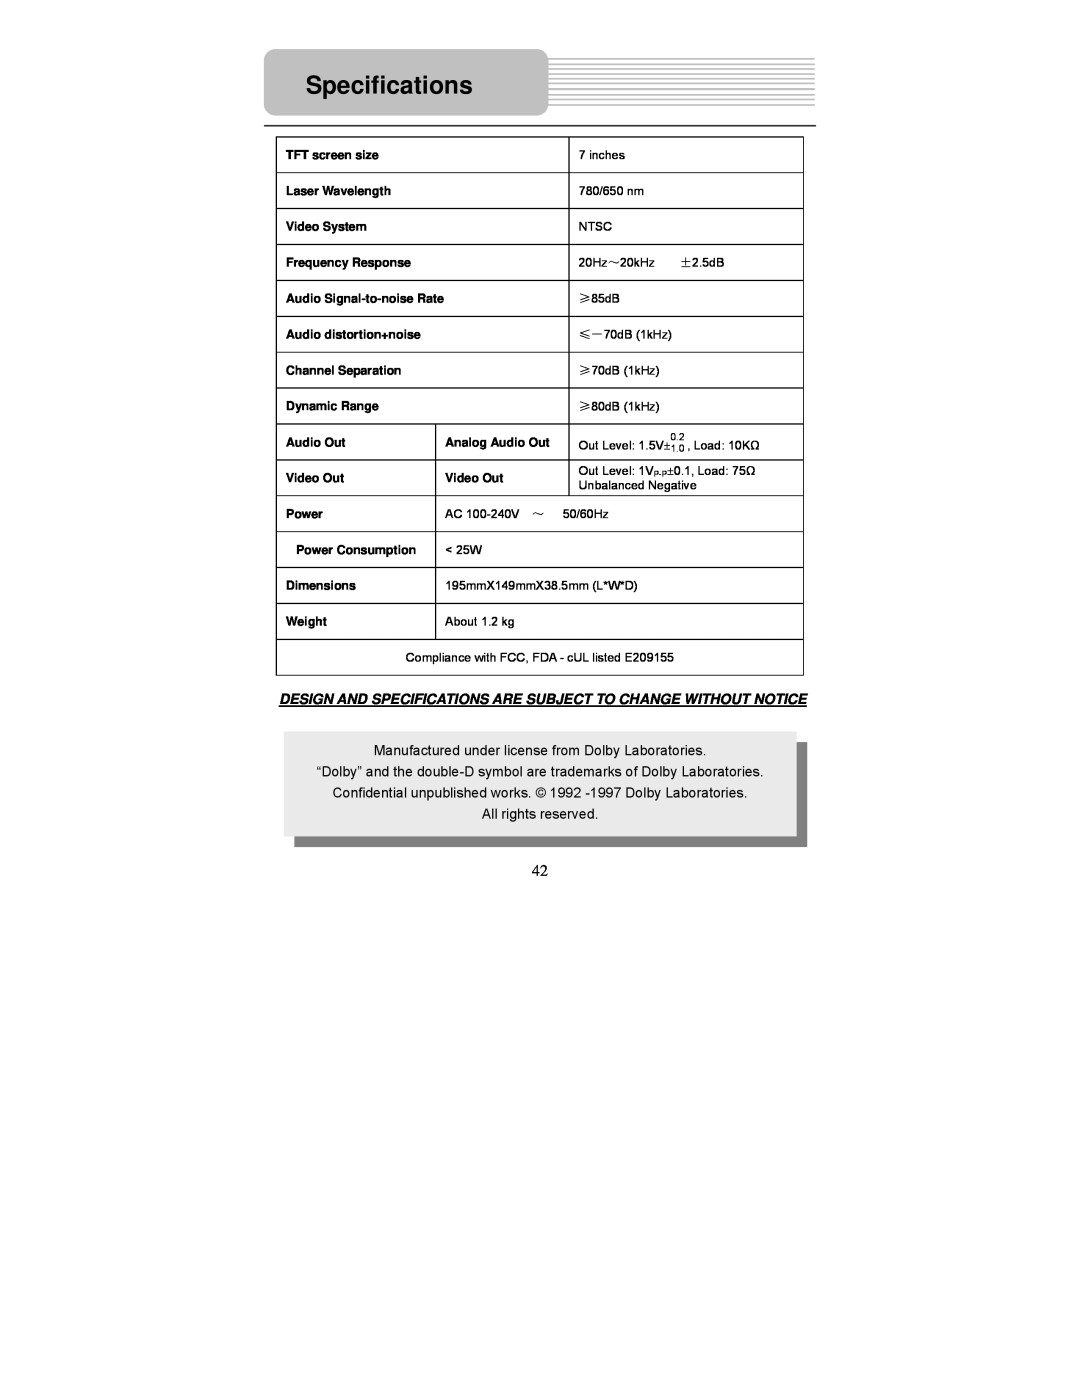 Polaroid PDM-0725 operation manual Design And Specifications Are Subject To Change Without Notice 